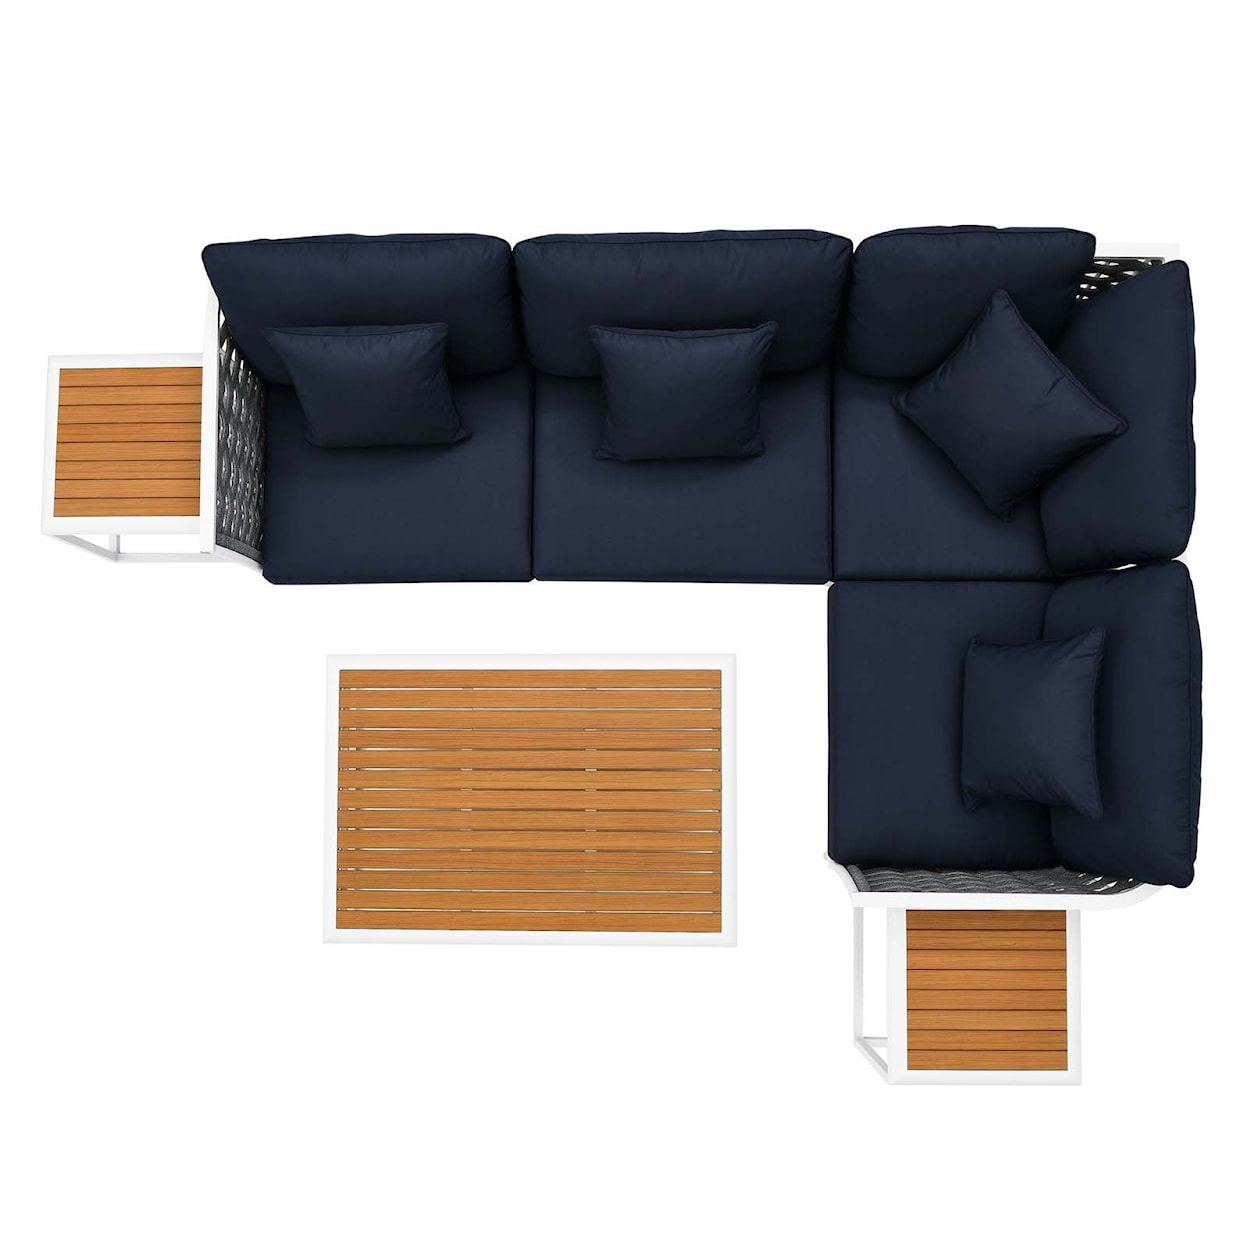 Modway Stance Stance 7 Piece Outdoor Sofa Set